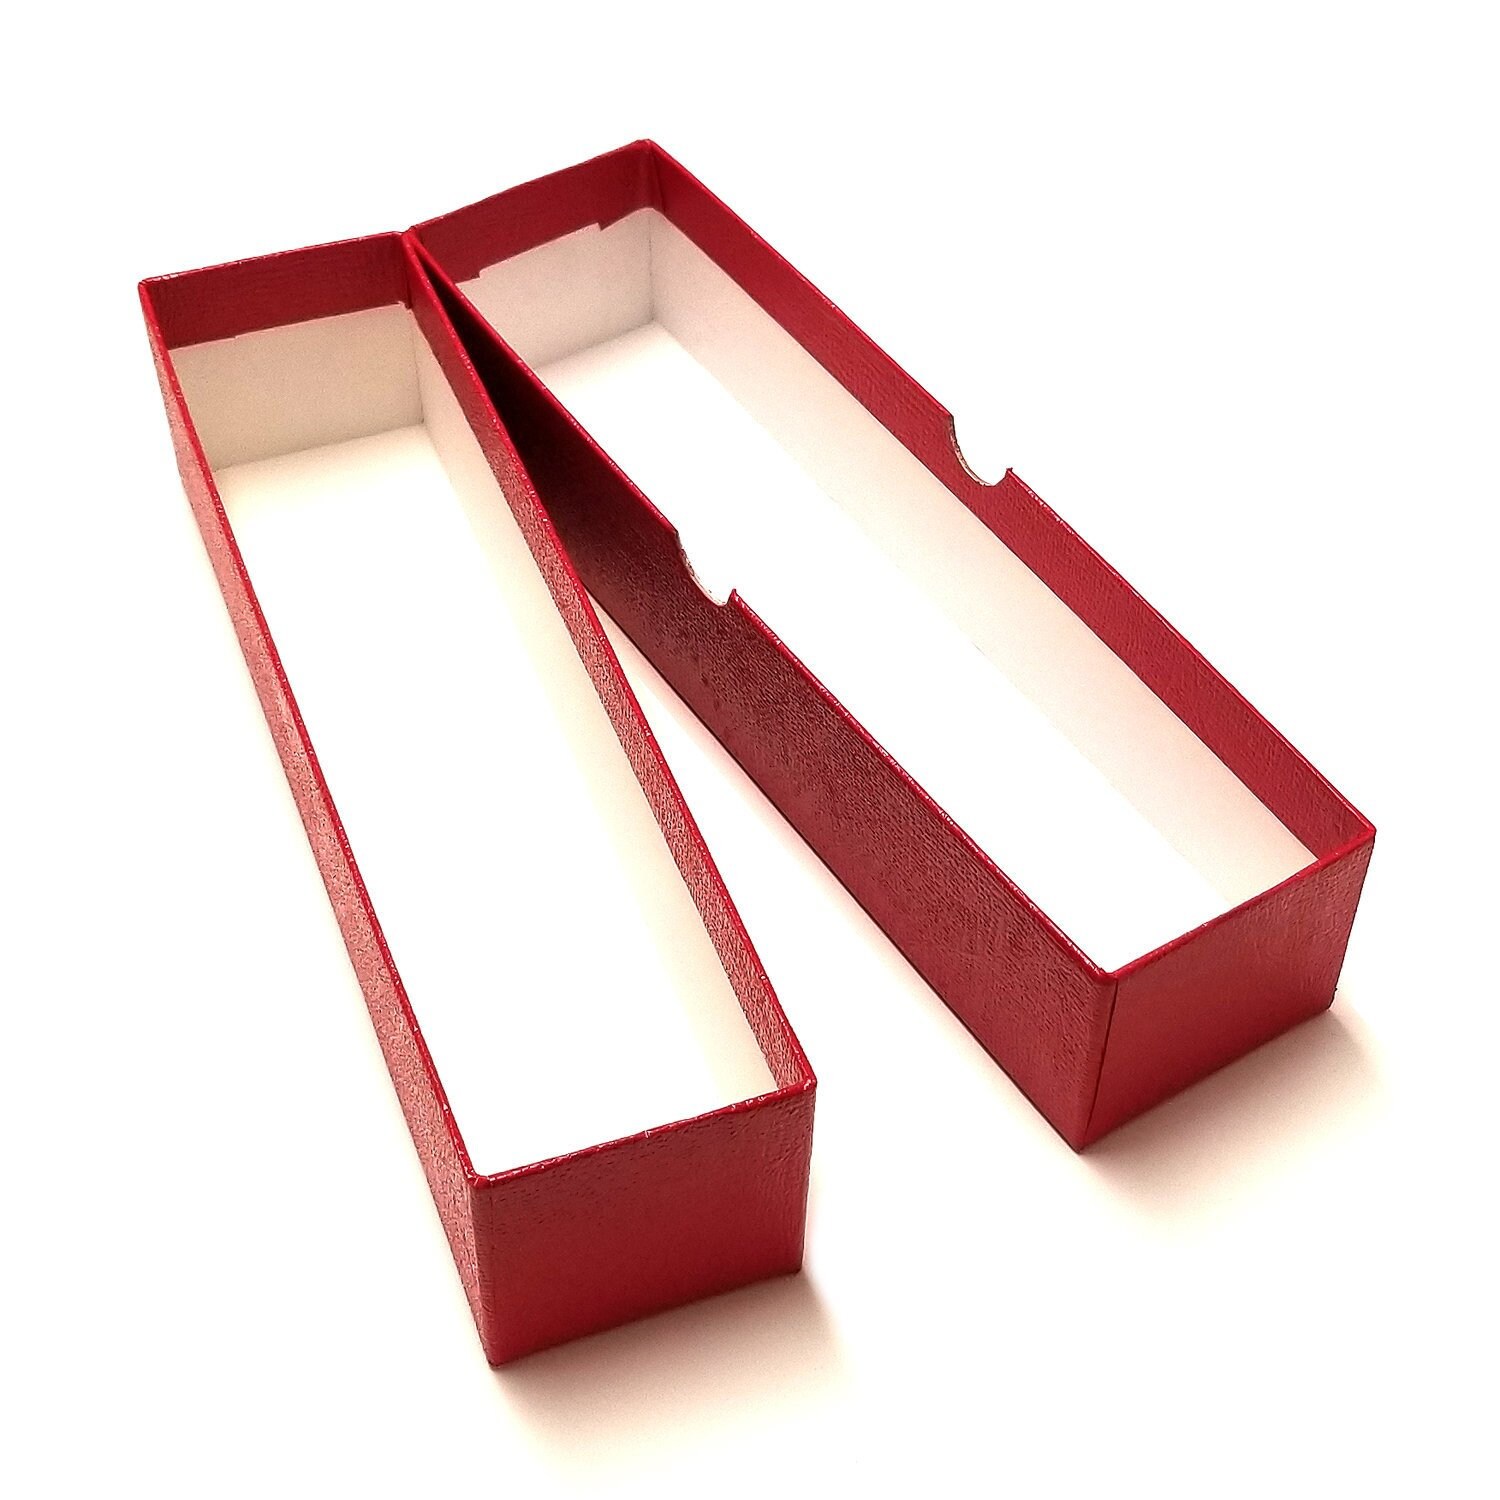 9x2x2 Red Storage Box with 100 Dime Paper Coin Holders/Flips by Guardhouse 